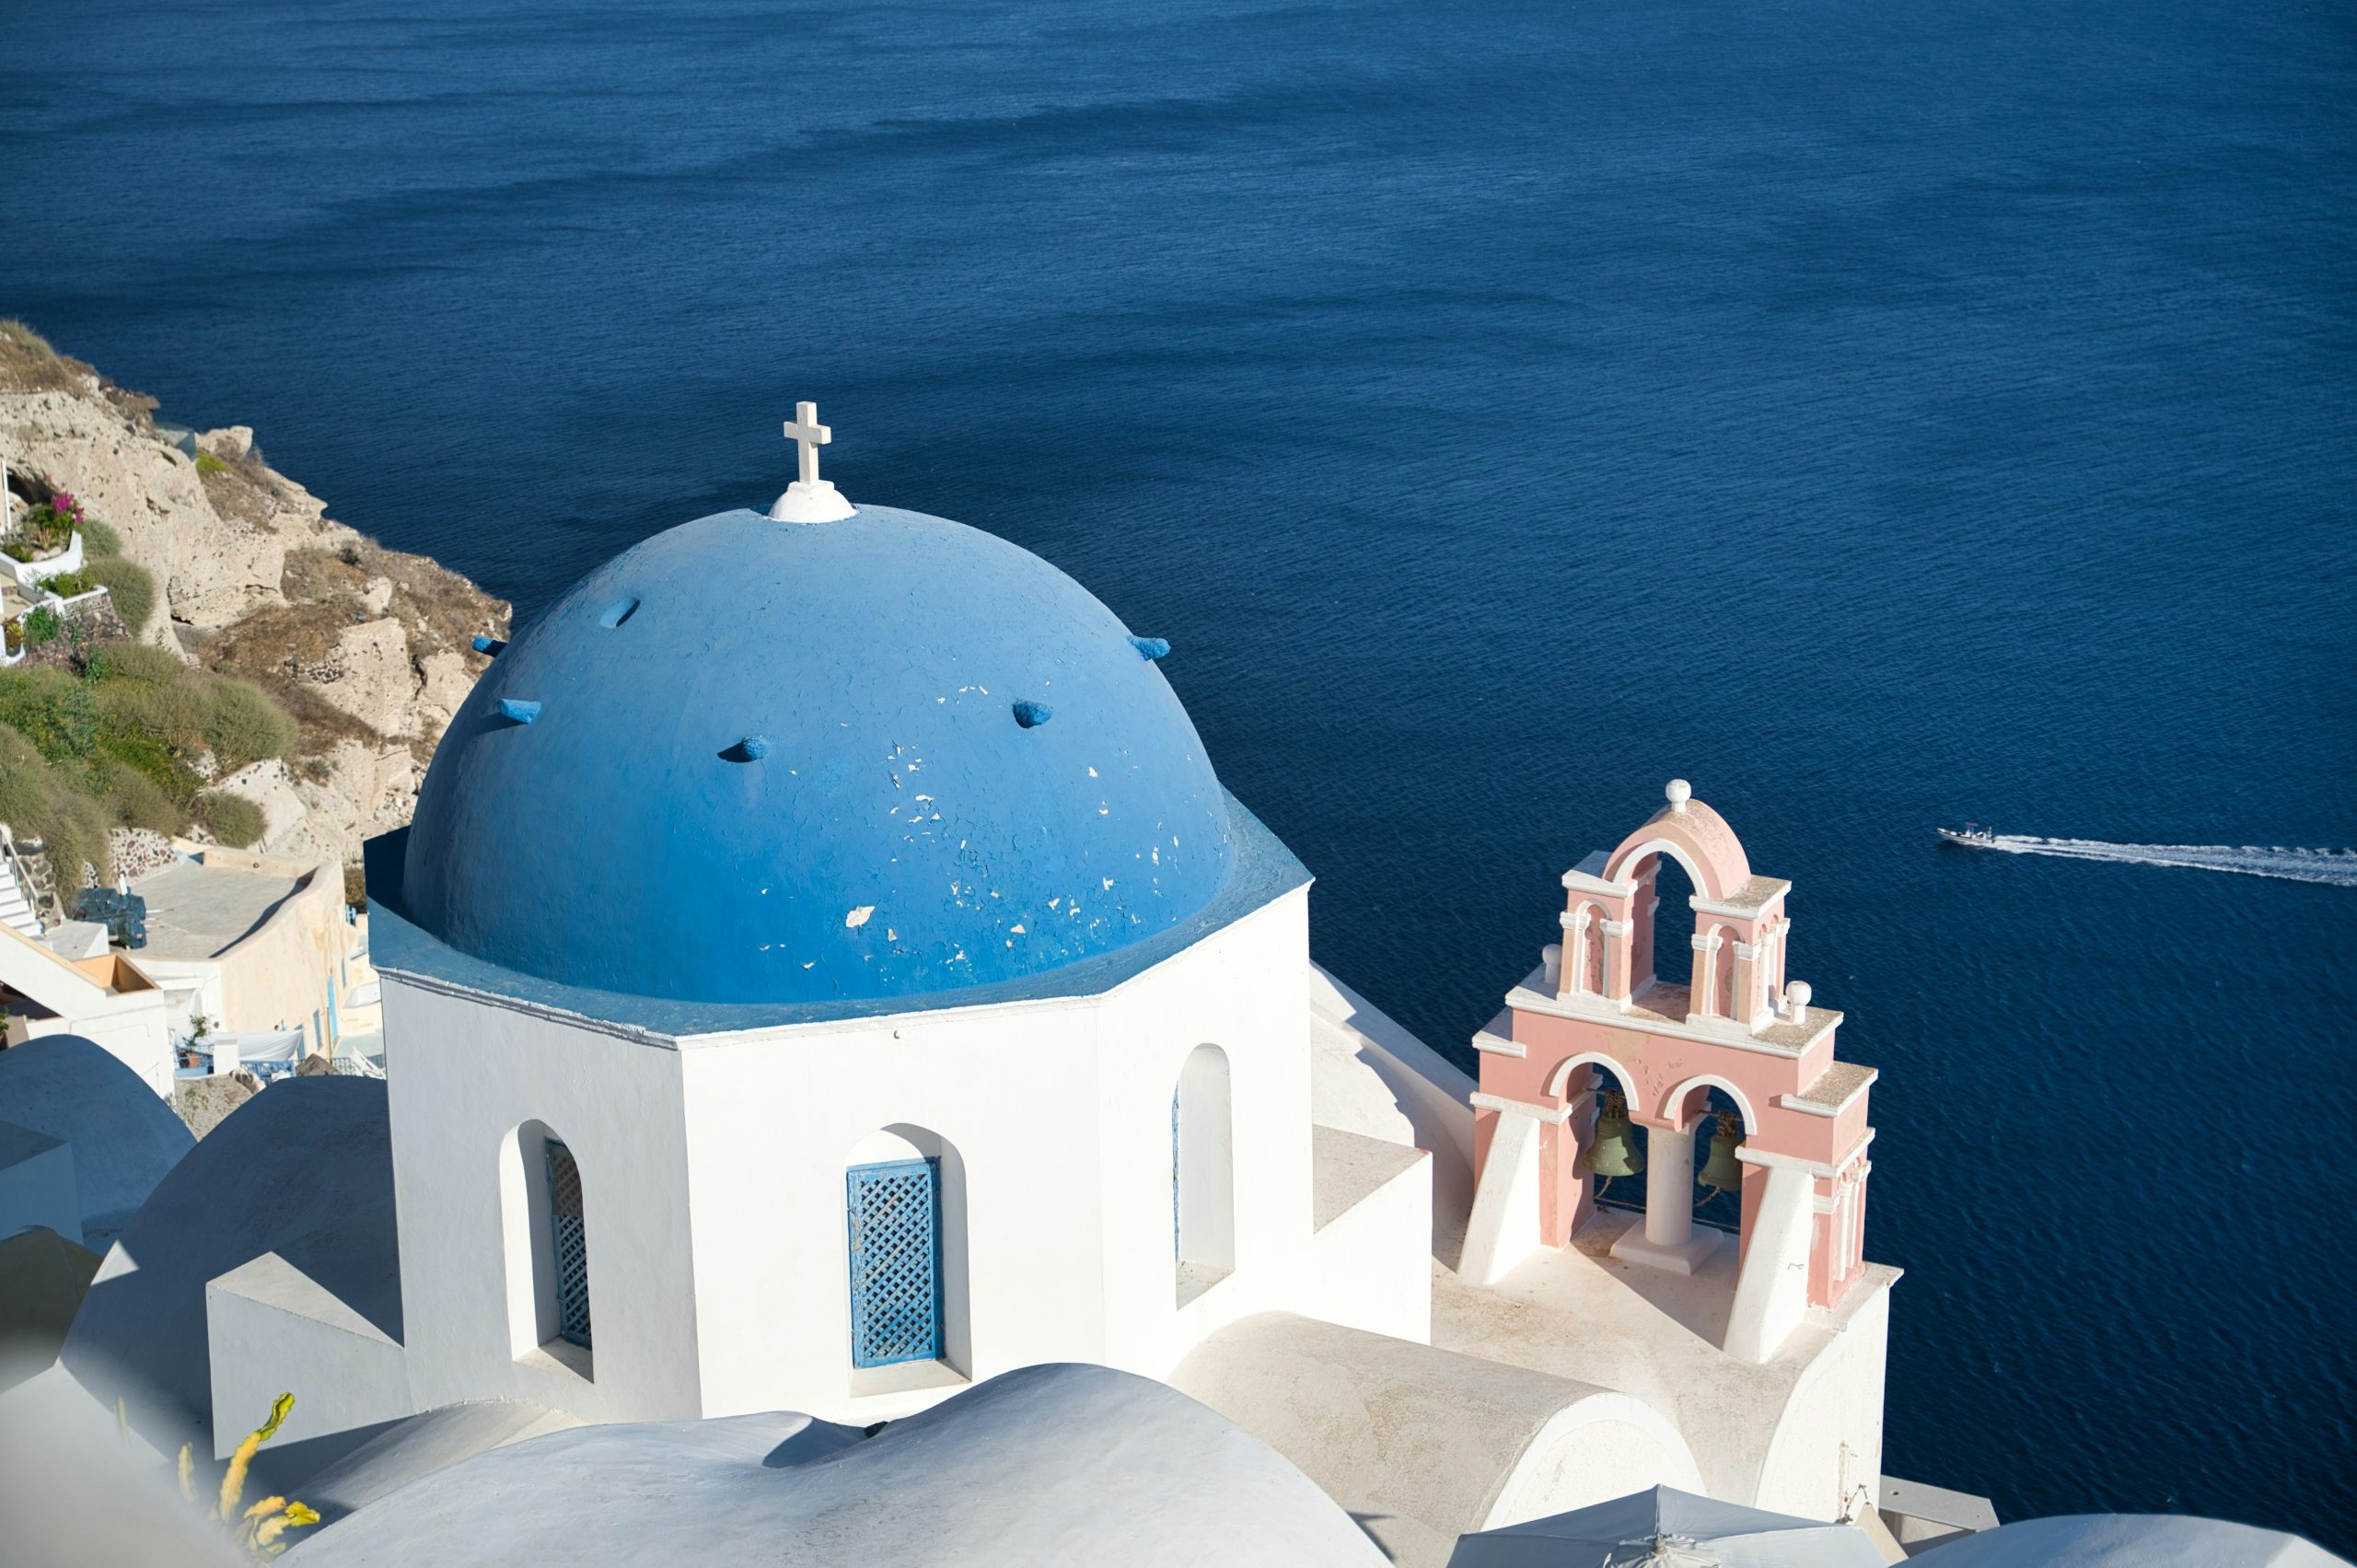 discover the beauty of the cyclades islands with stunning beaches, charming villages, and rich history. plan your dream vacation to the cyclades today!